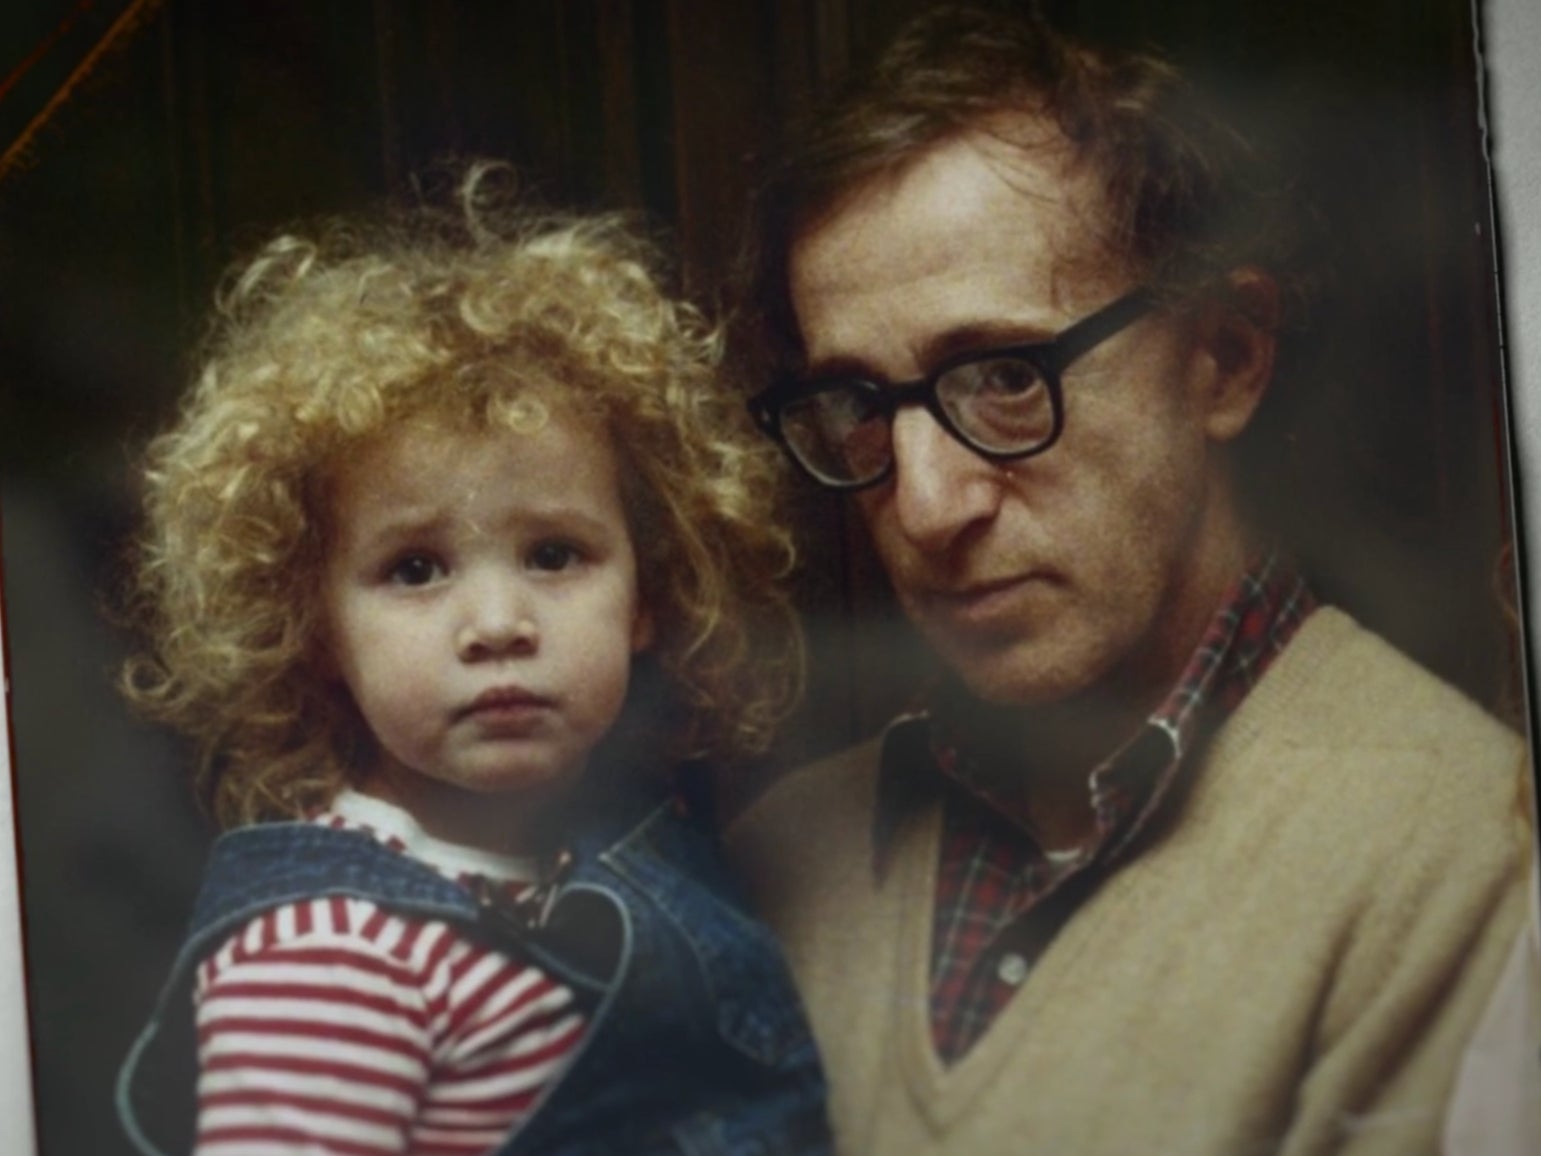 Dylan Farrow and Woody Allen in a childhood photo featured in the HBO documentary Allen v Farrow